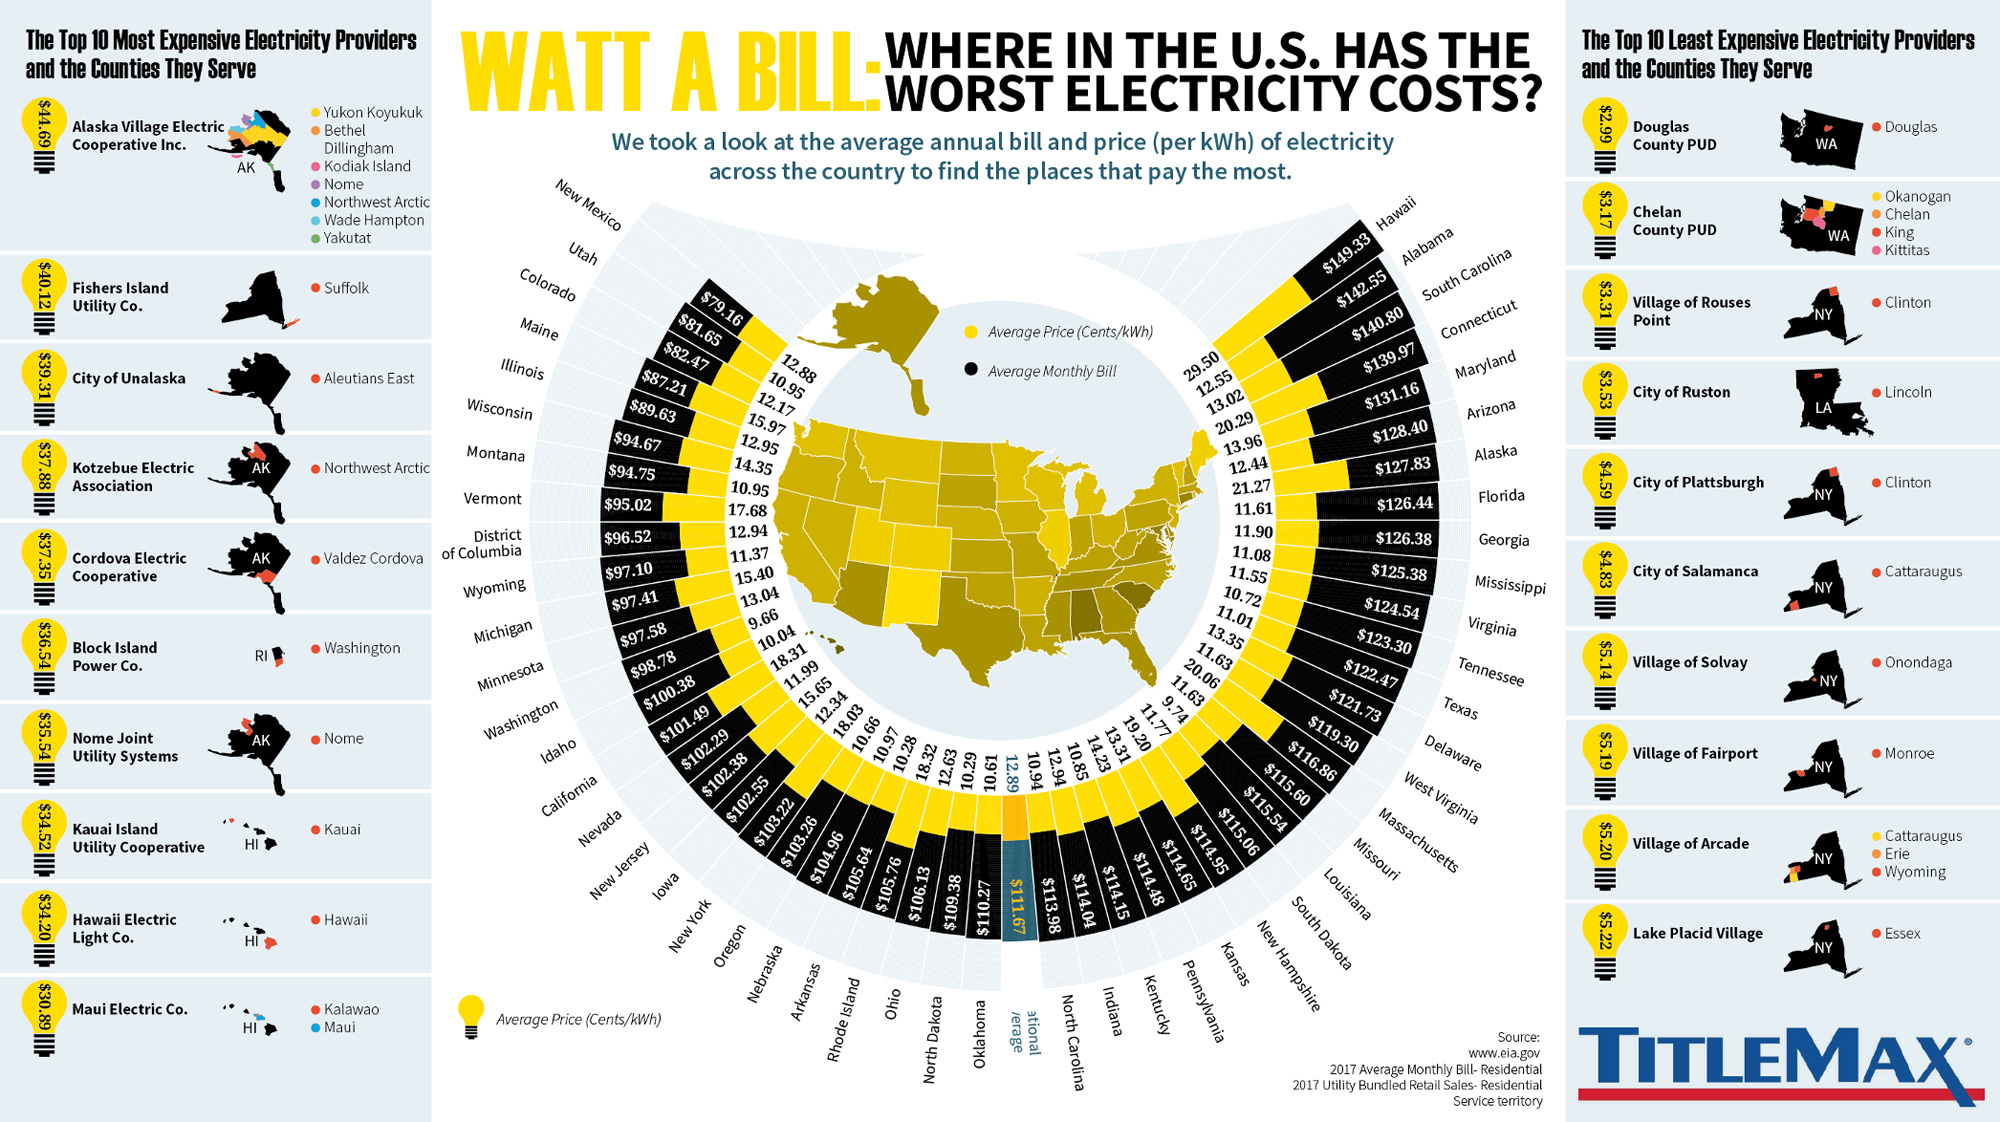 Where In the U.S. Are the Worst Electricity Bills?